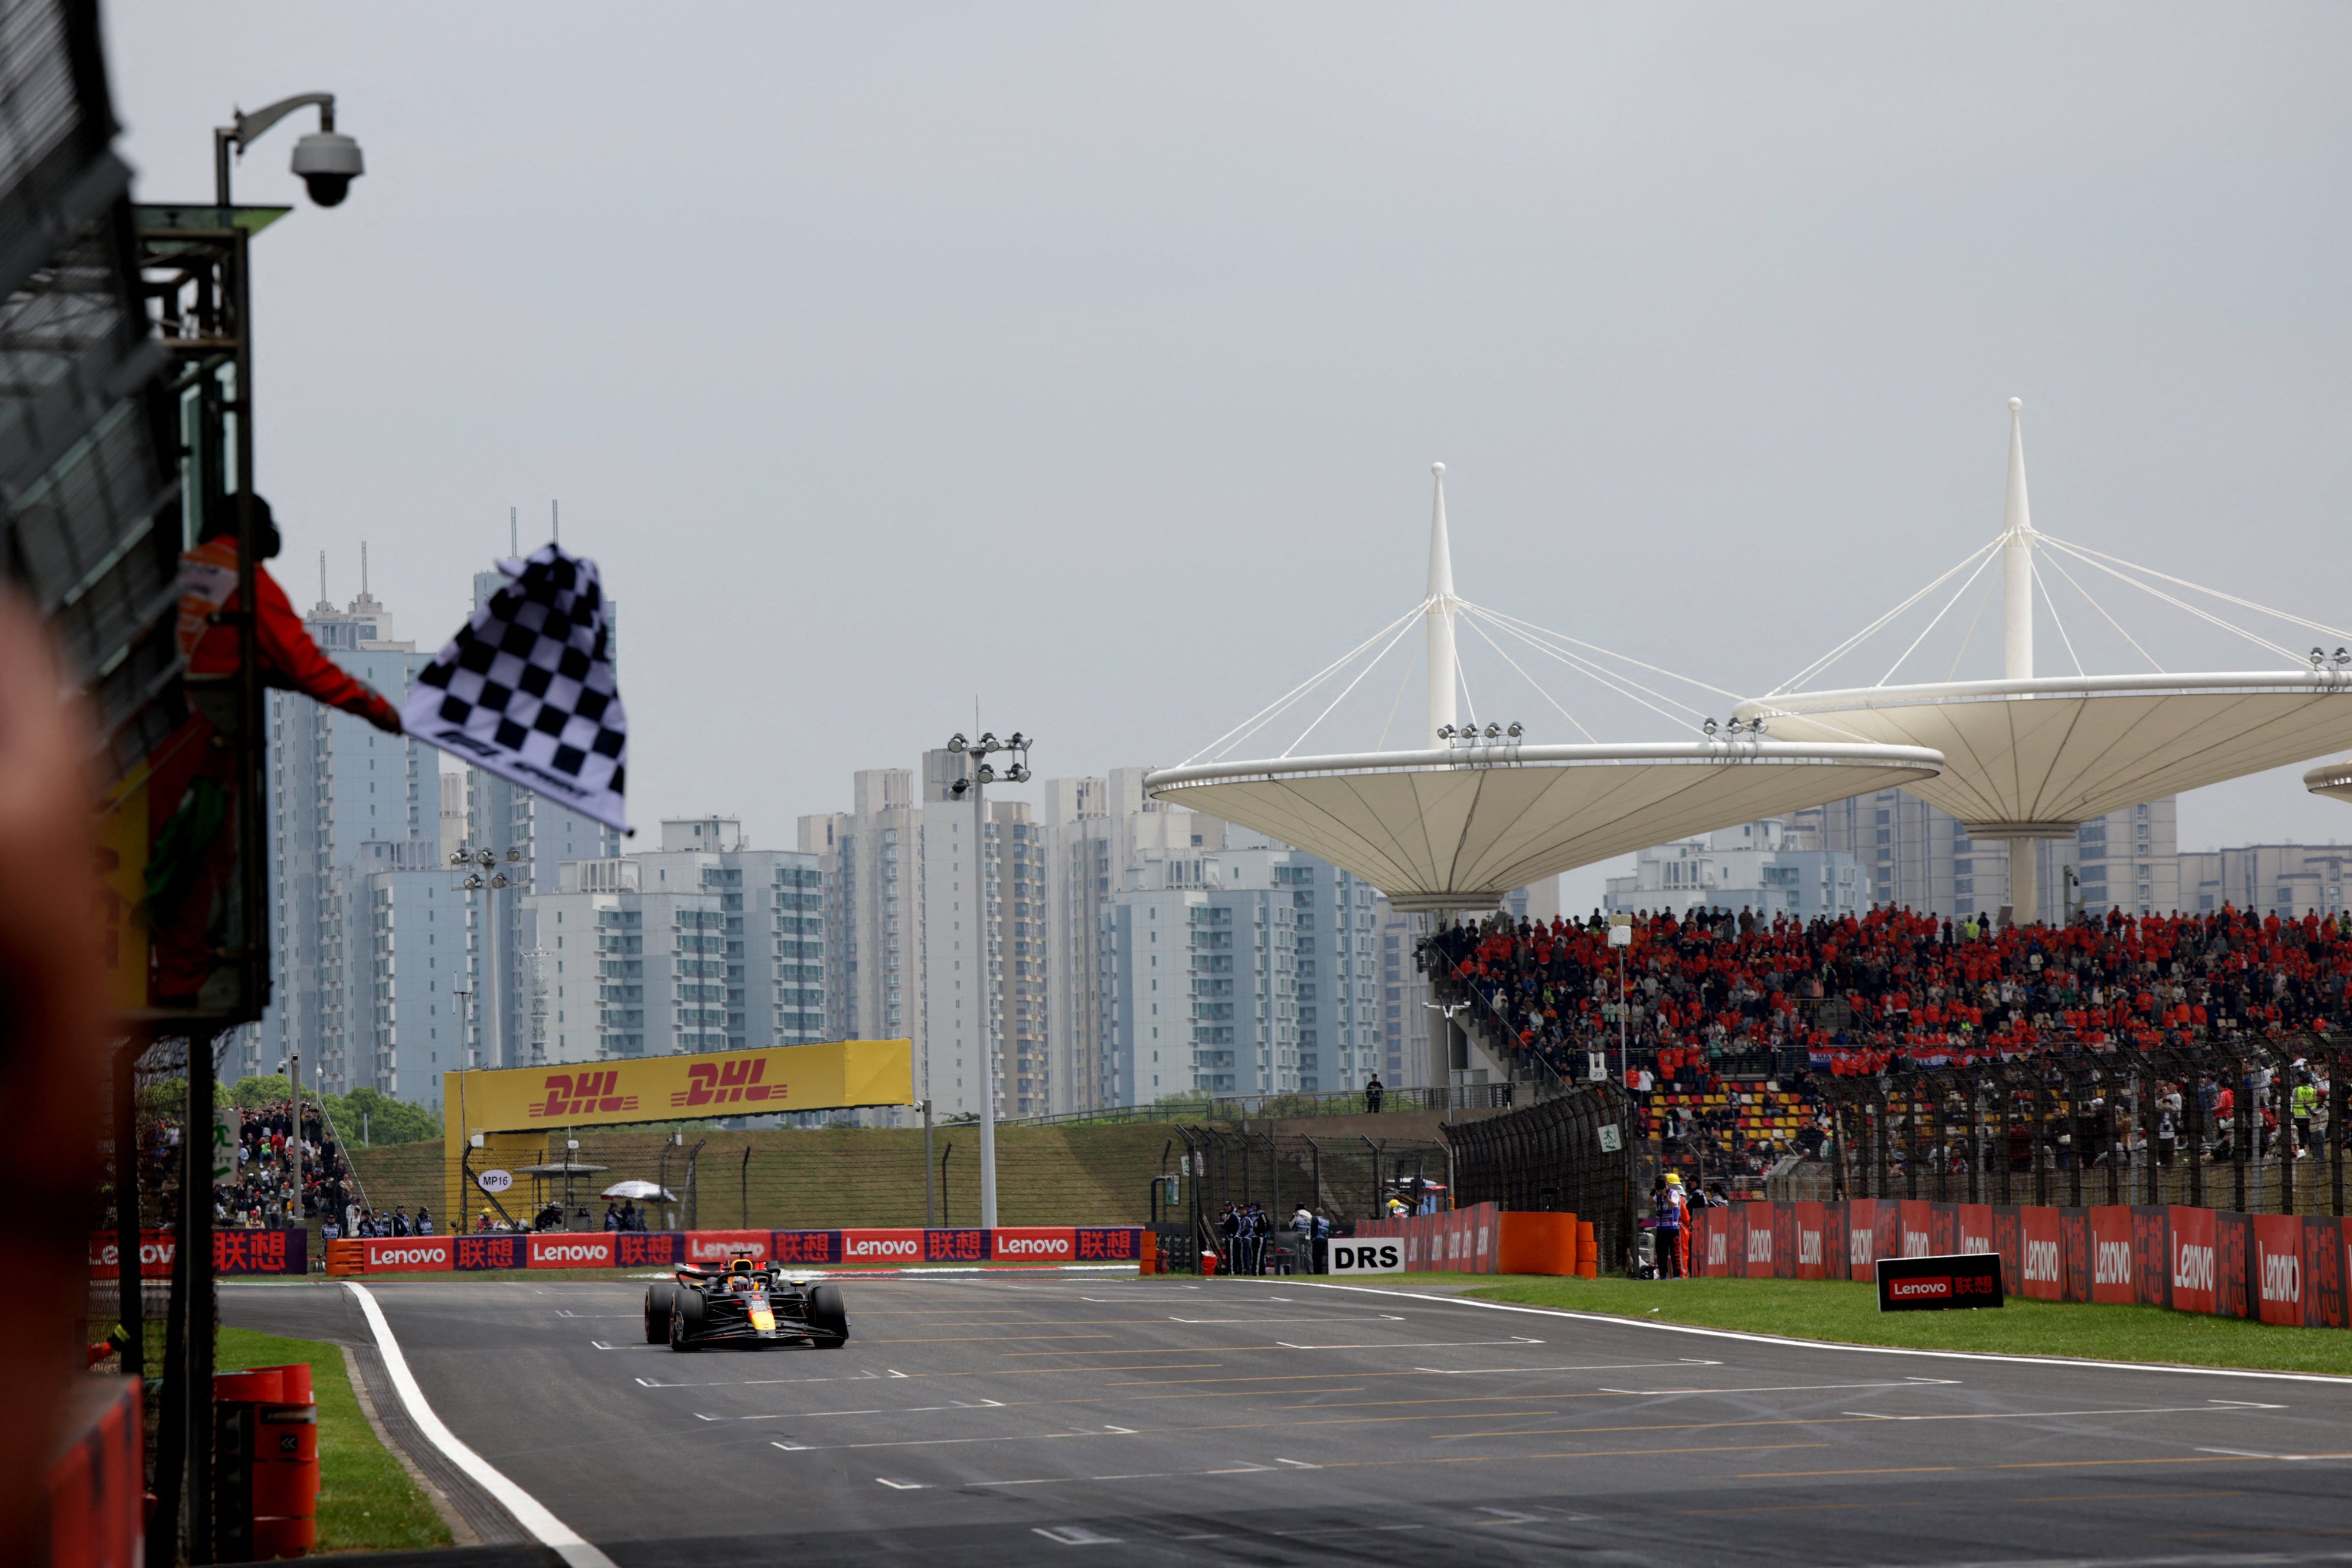 Red Bull’s Max Verstappen takes the chequered flag to win the sprint race at the Chinese Grand Prix. Photo: Reuters